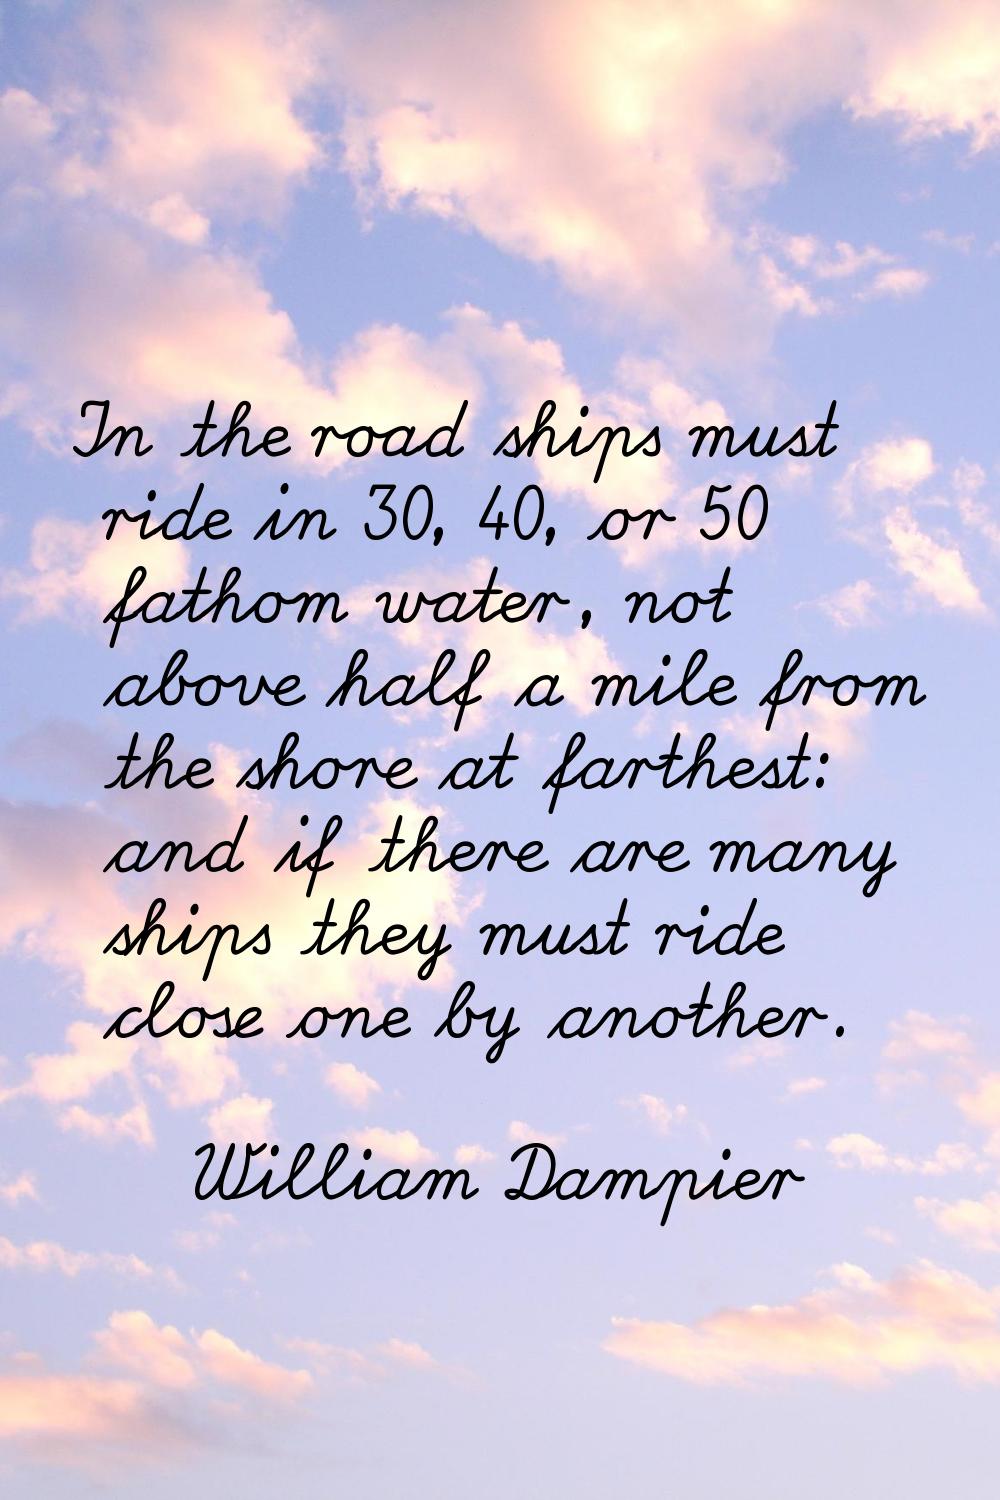 In the road ships must ride in 30, 40, or 50 fathom water, not above half a mile from the shore at 